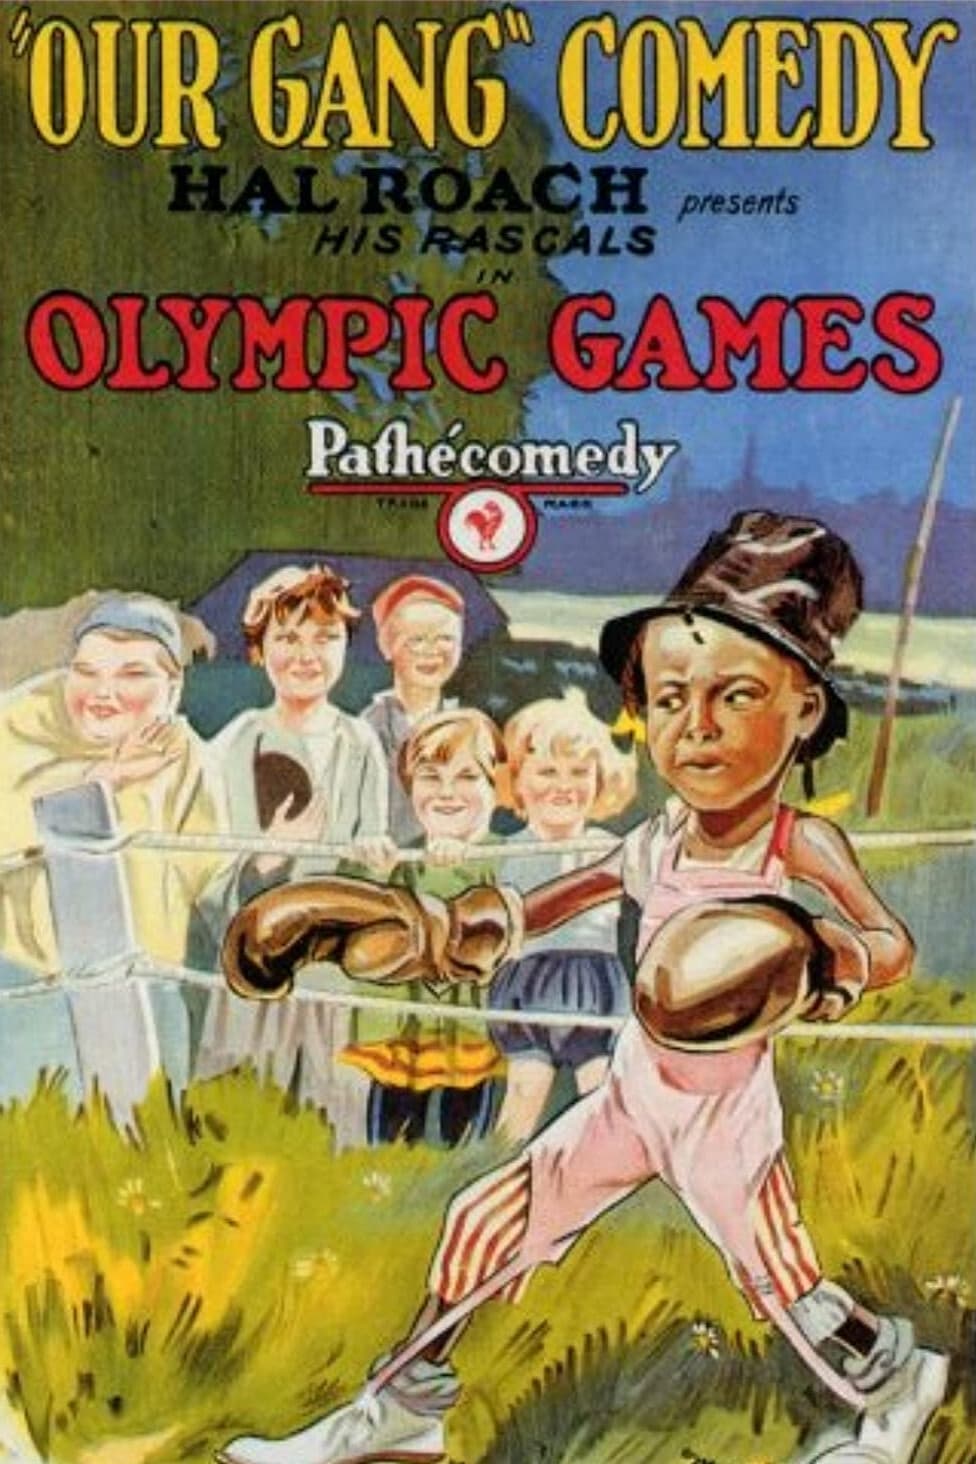 Olympic Games (1927)